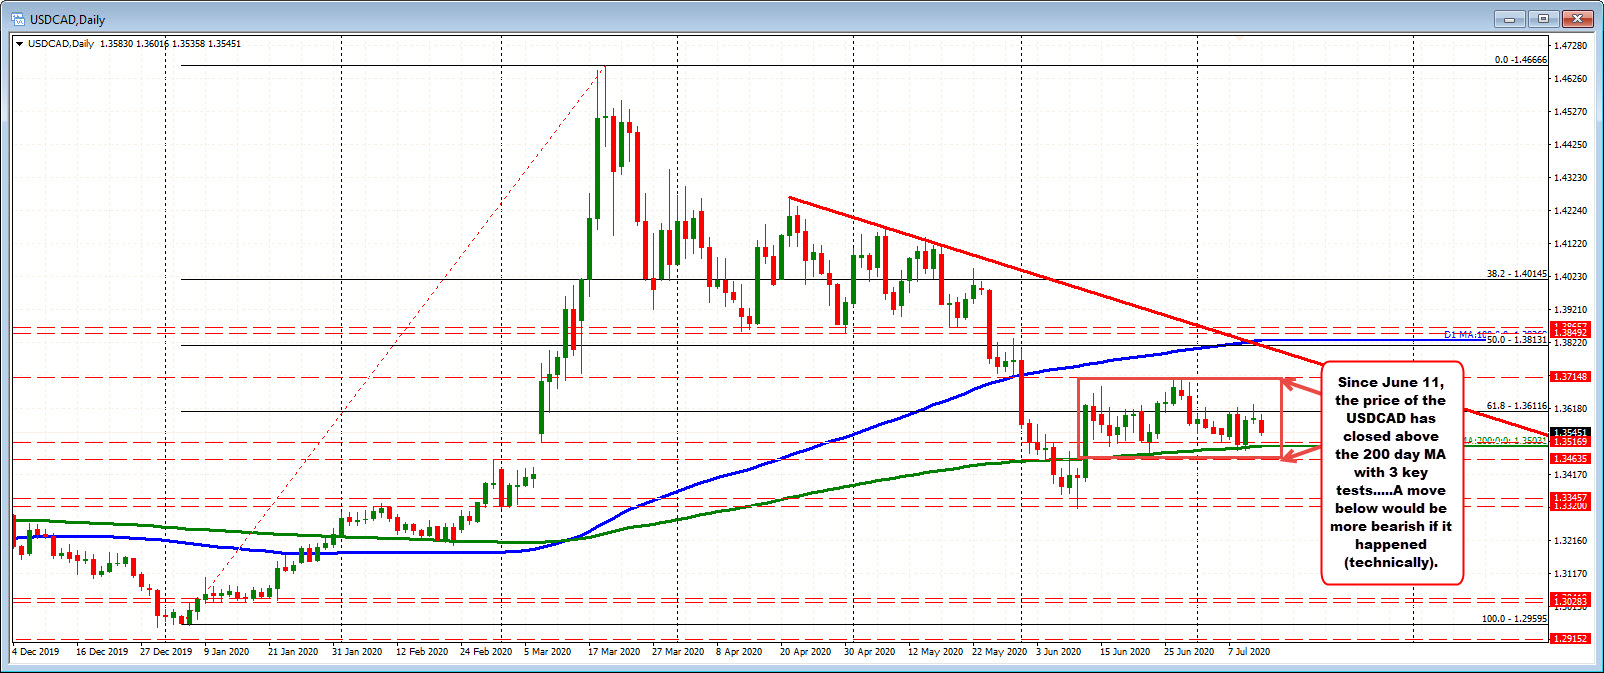 USDCAD on the daily chart. 